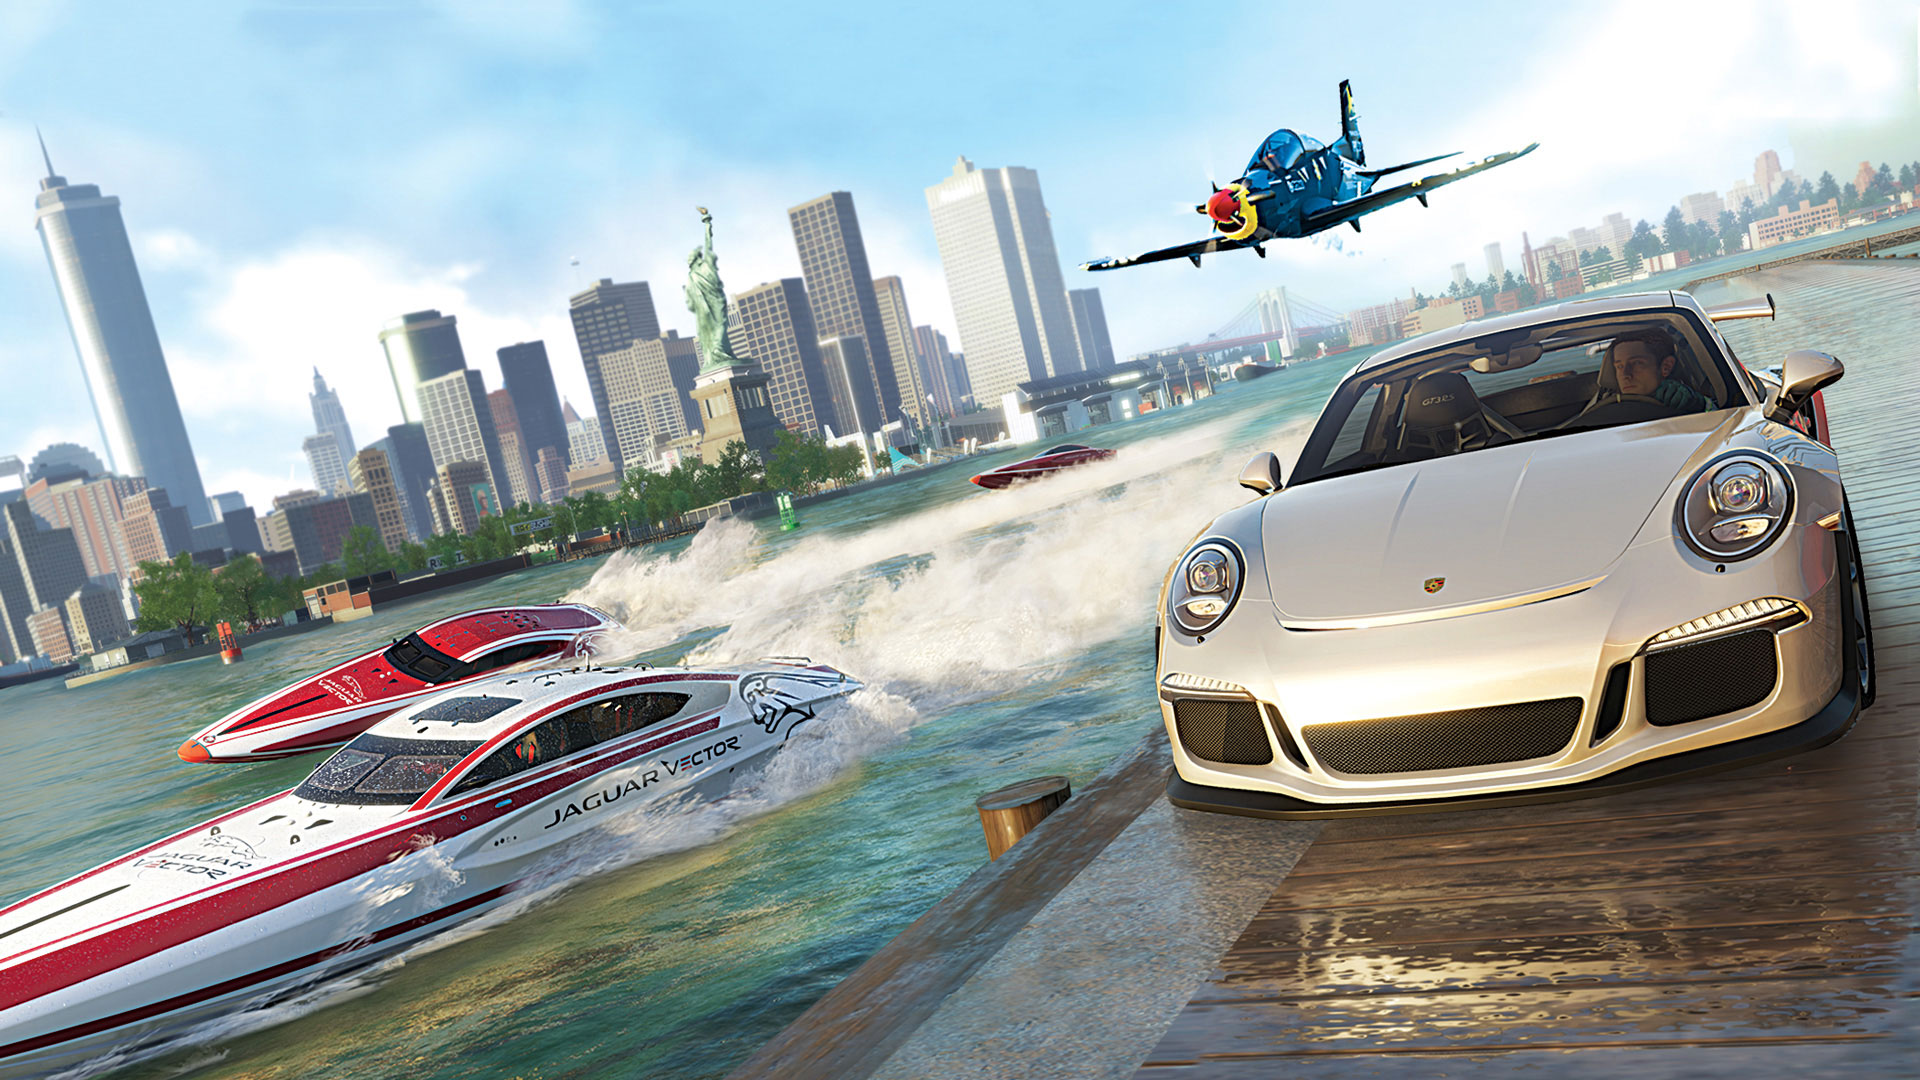 the crew 2 game